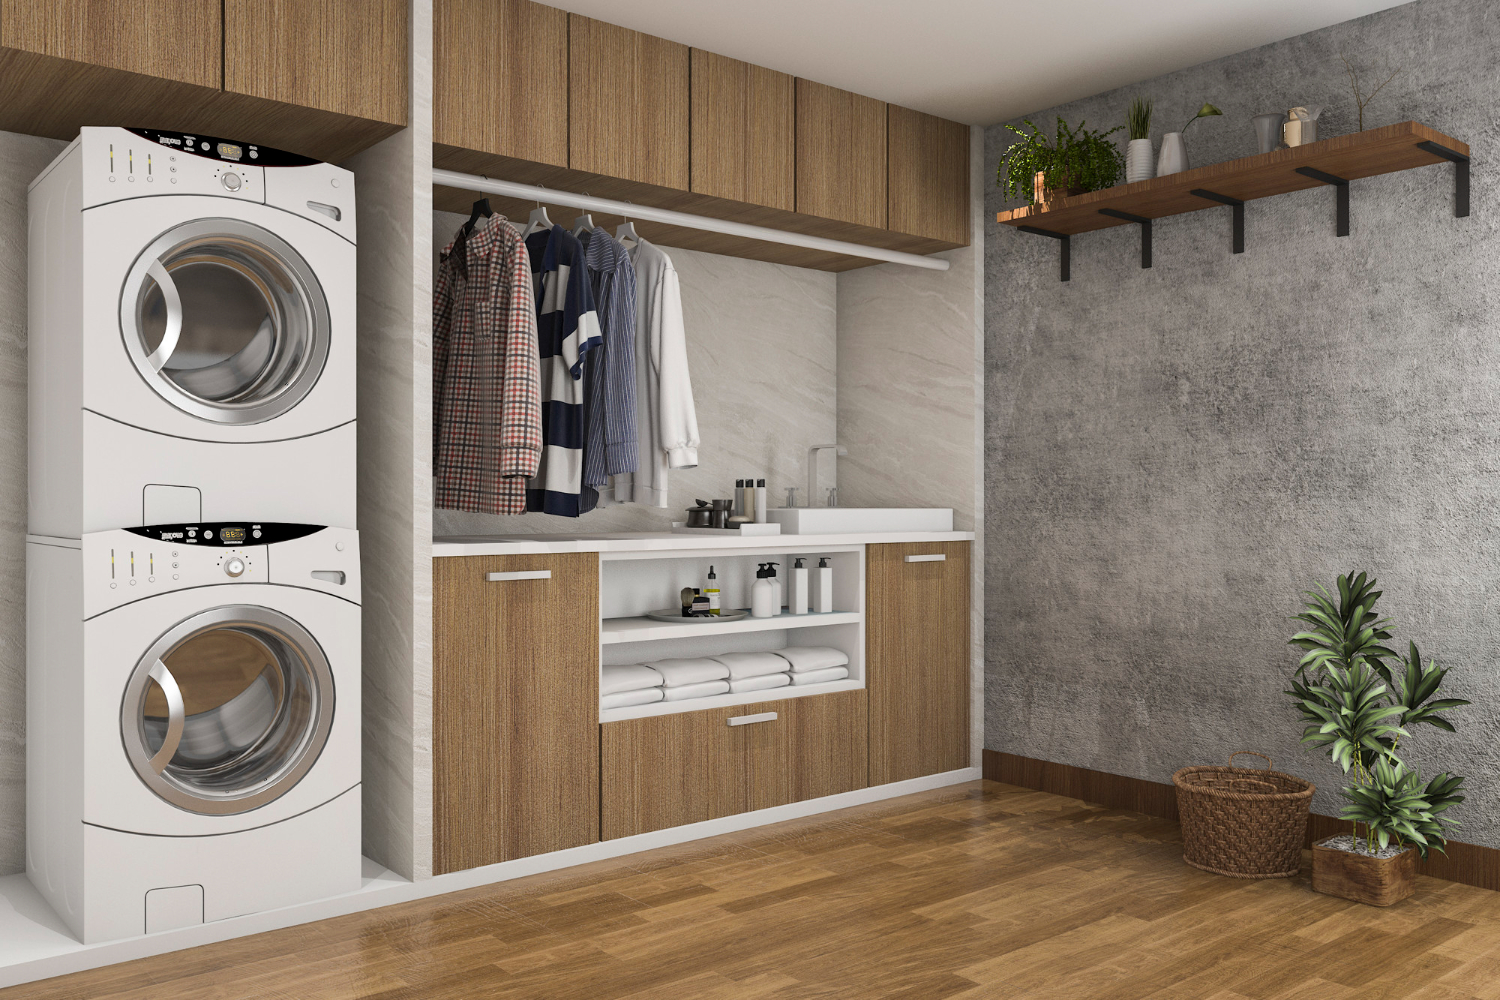 Upgrading the amenities in a studio apartment, like an in-unit laundry space, can make marketing the small space easier.